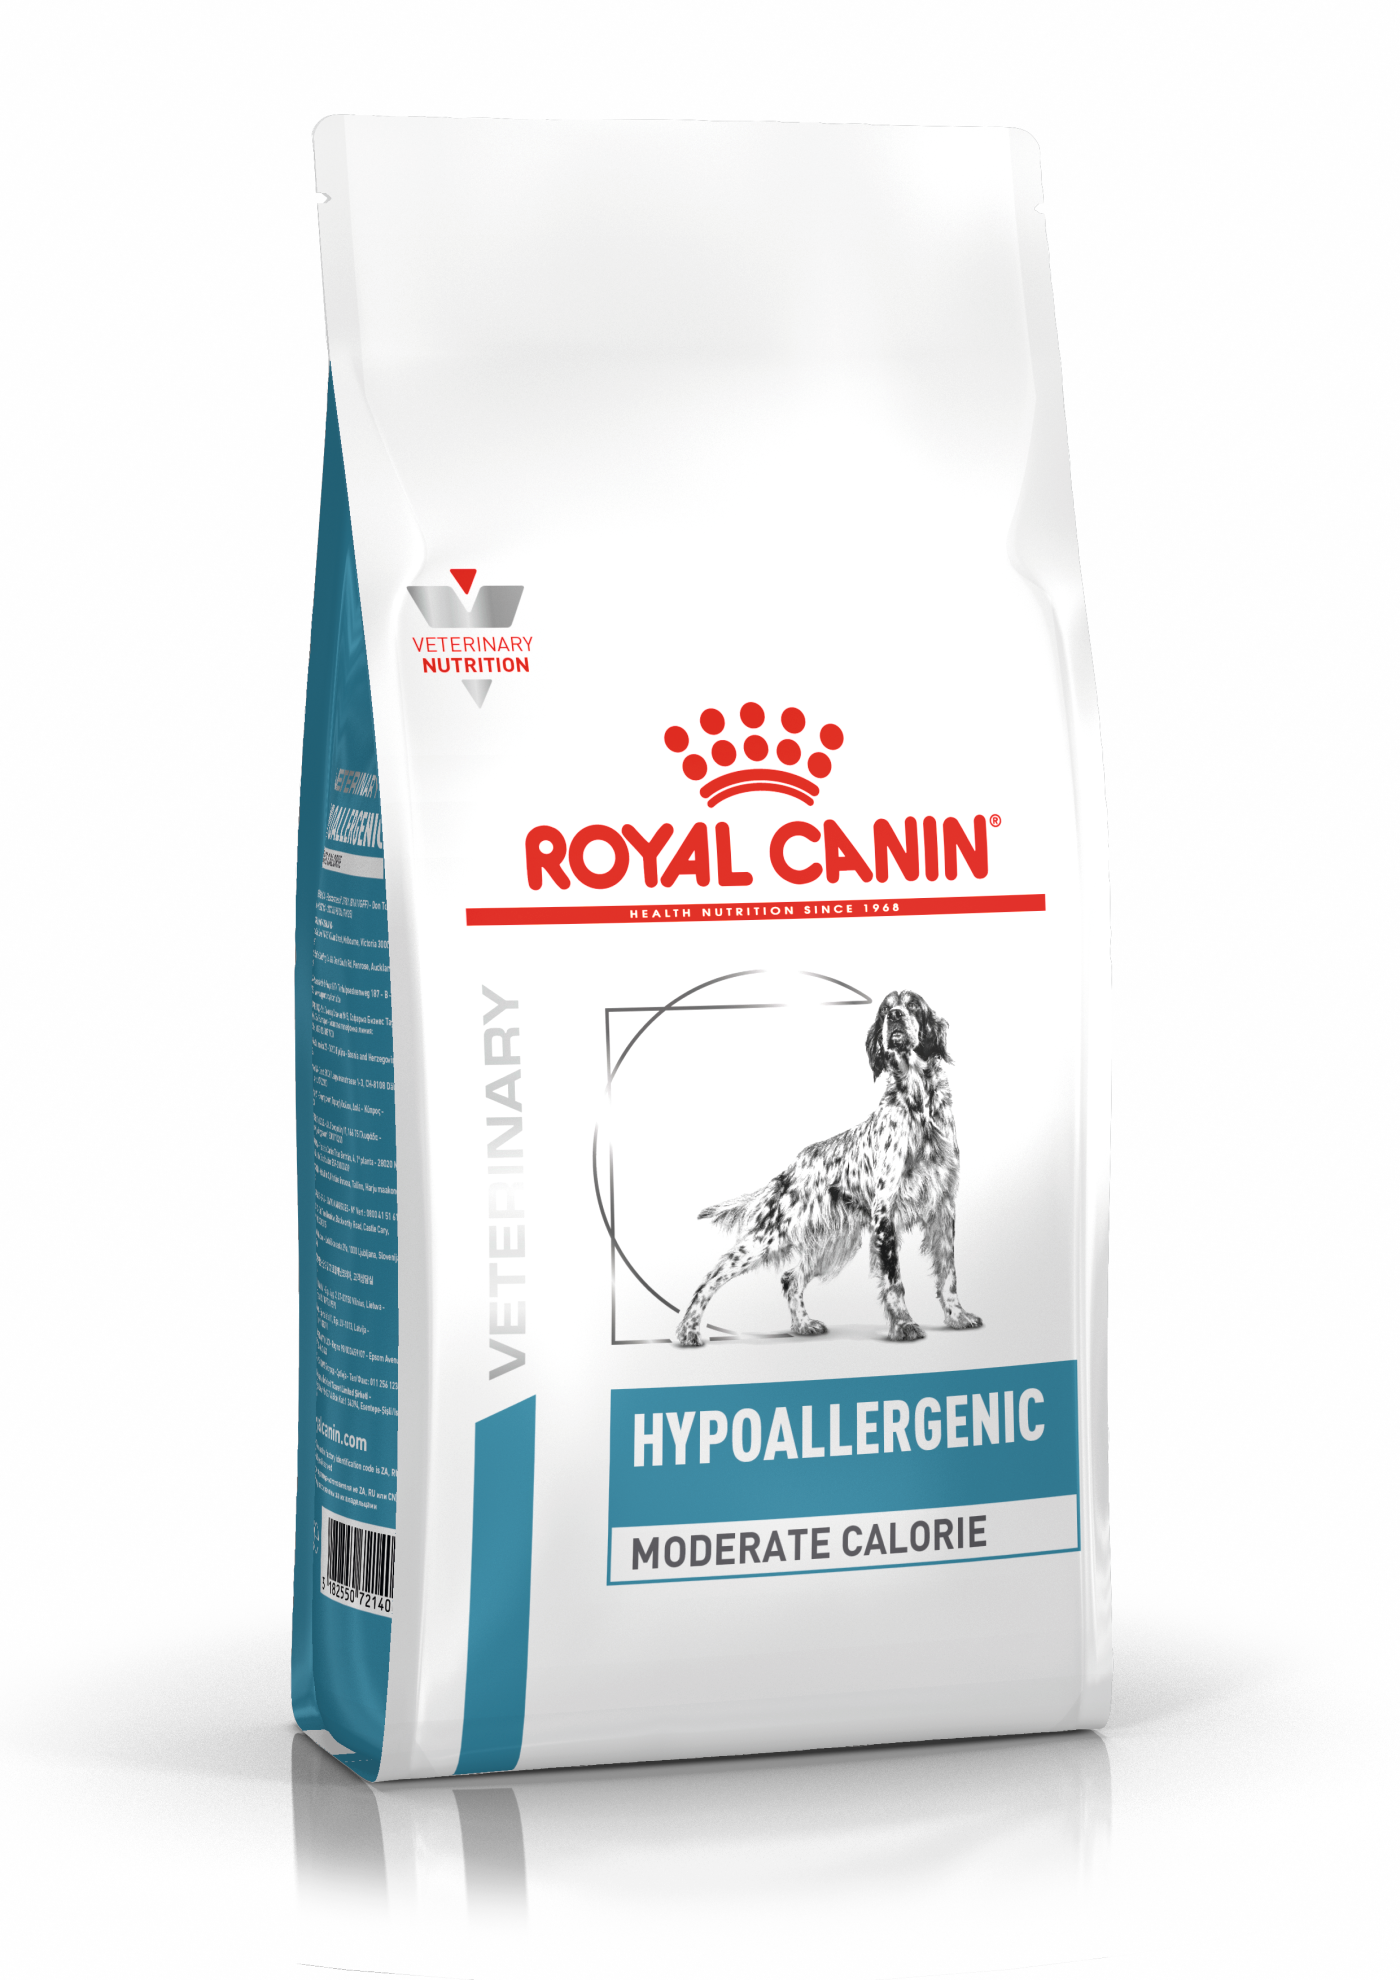 Royal Canin Hypoallergenic Moderate Calorie hond 1 x 7 kg